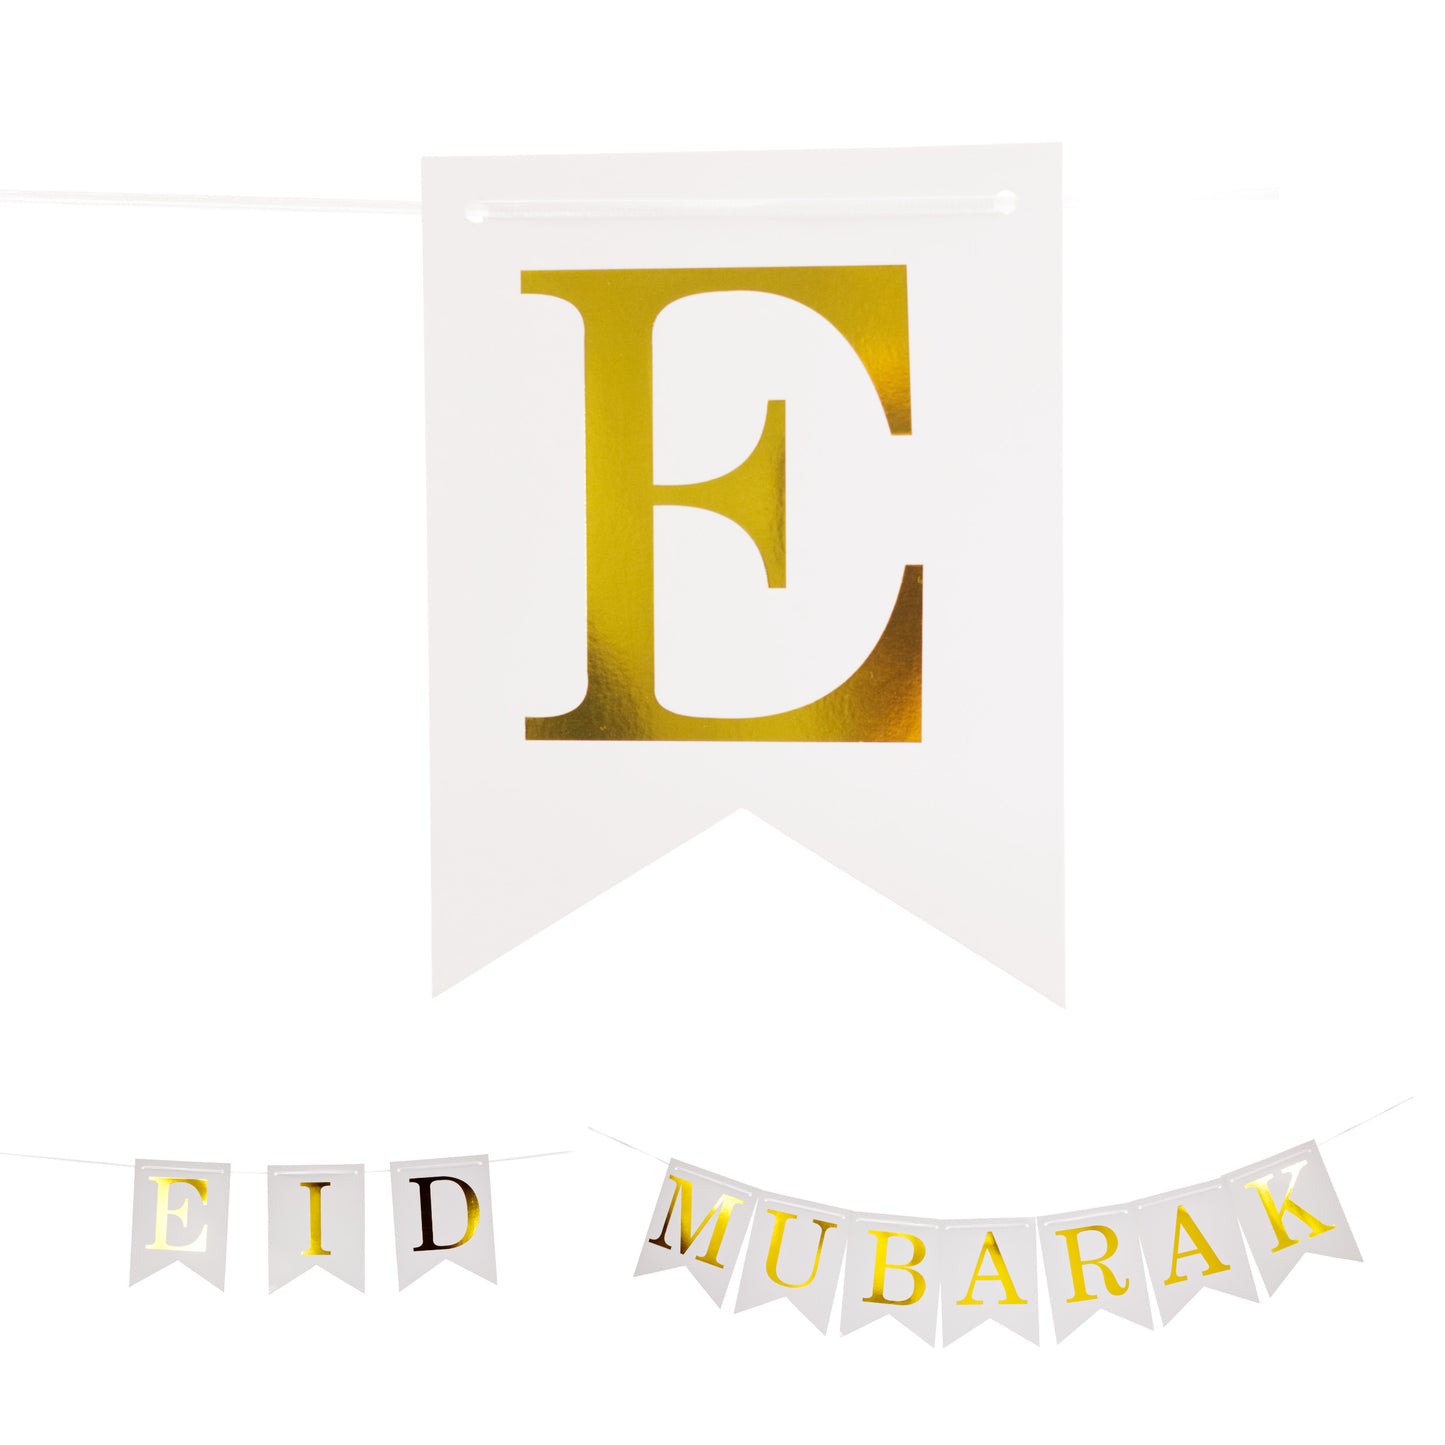 Eid Mubarak Gold Lettering Bunting - White and Gold